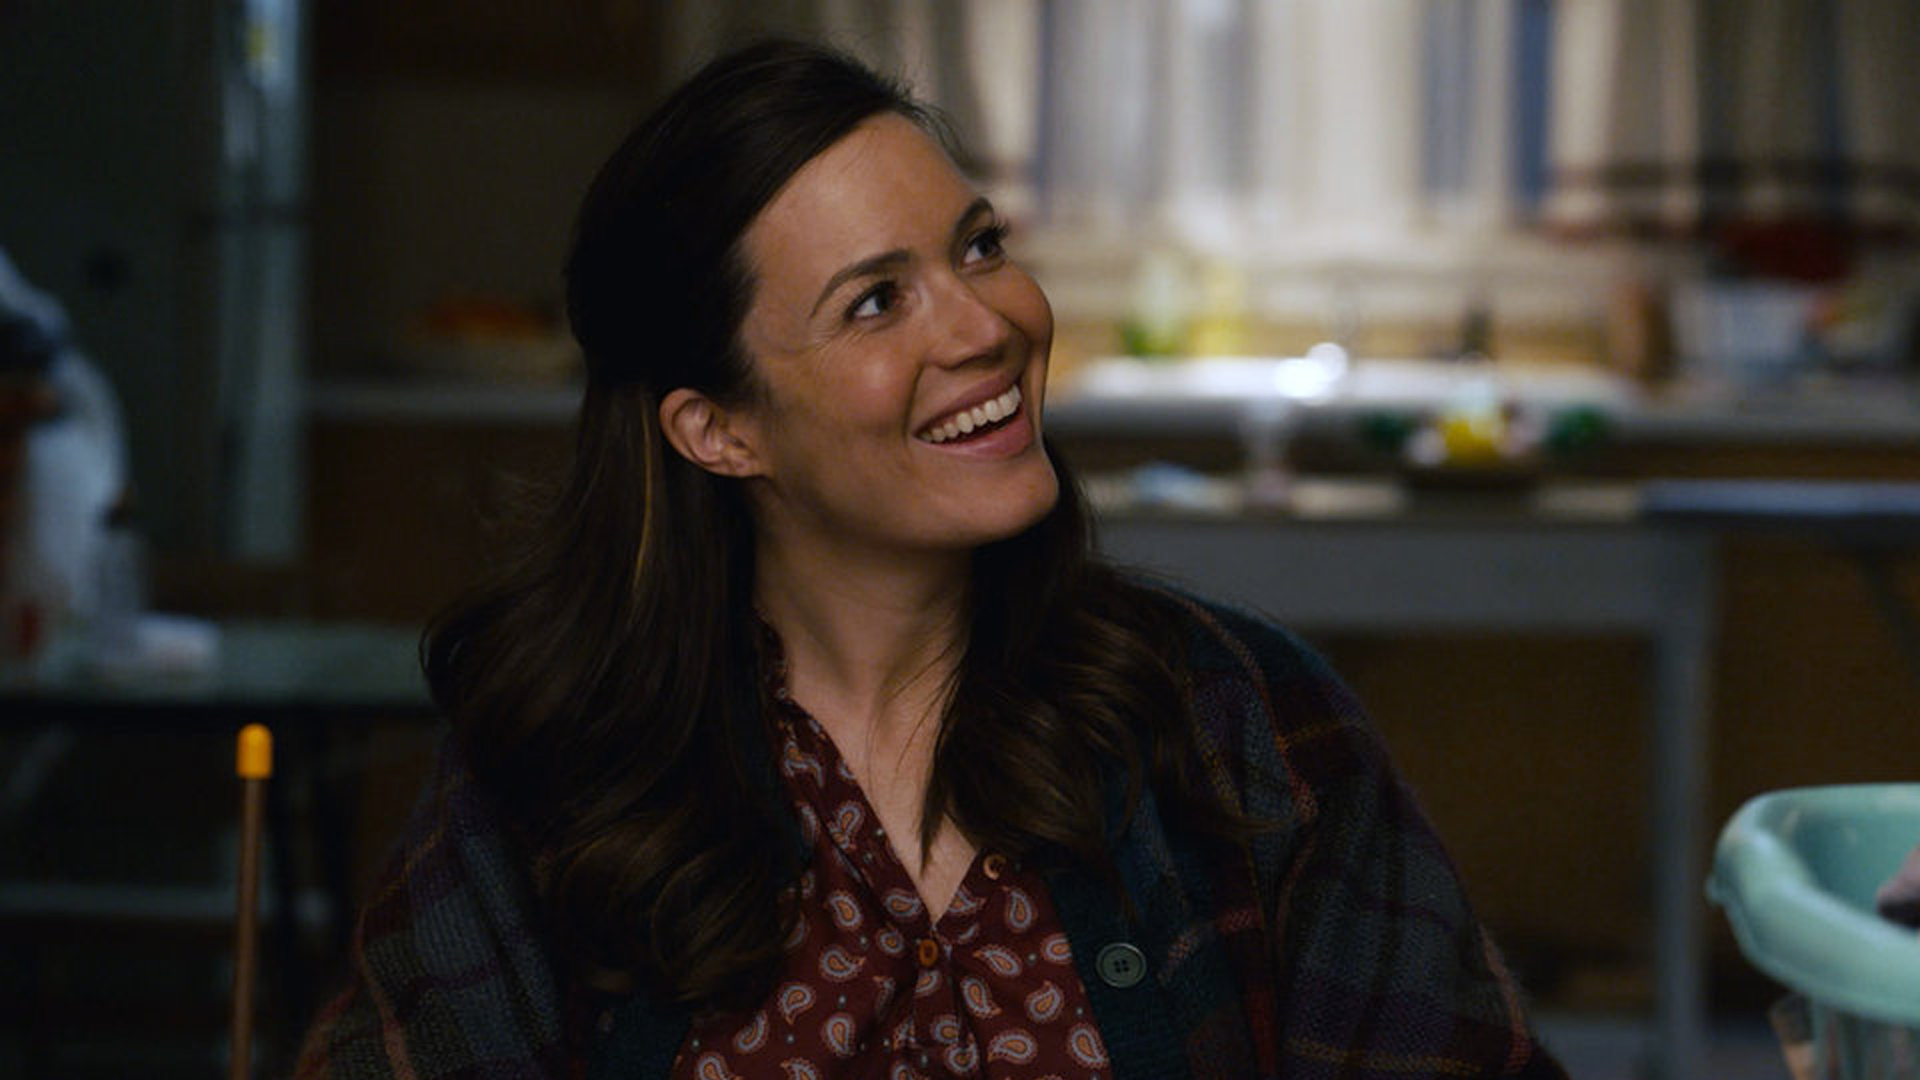 Mandy Moore as Rebecca Pearson in ‘This Is Us’ Season 5 Episode 10